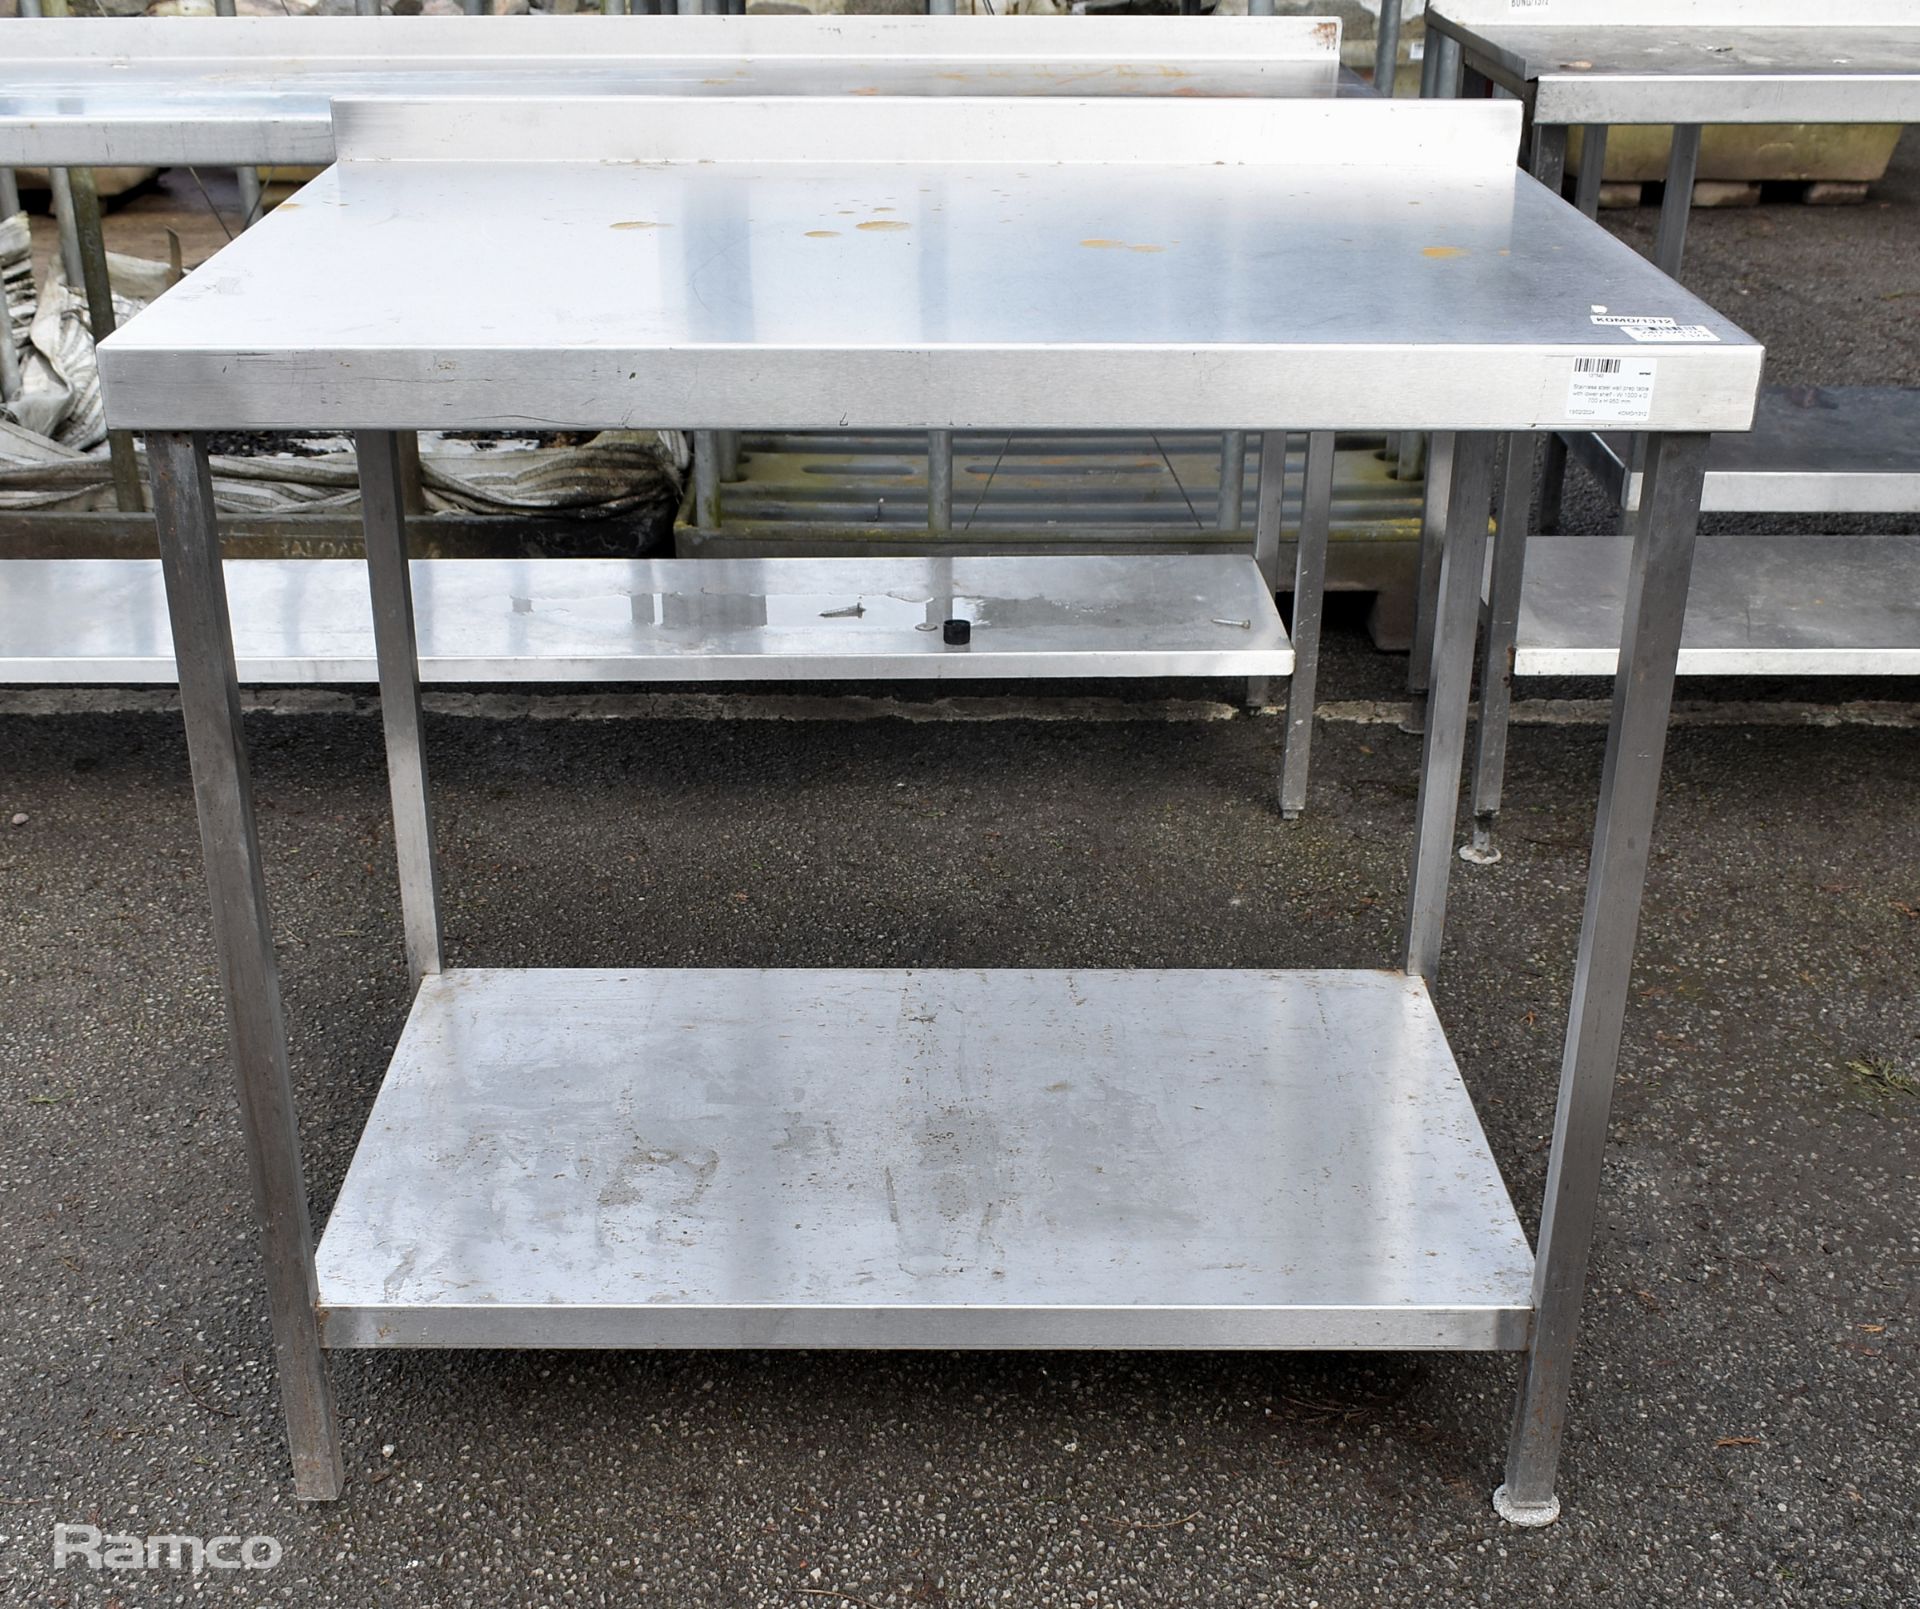 Stainless steel wall prep table with lower shelf - W 1000 x D 700 x H 950mm - Image 3 of 3